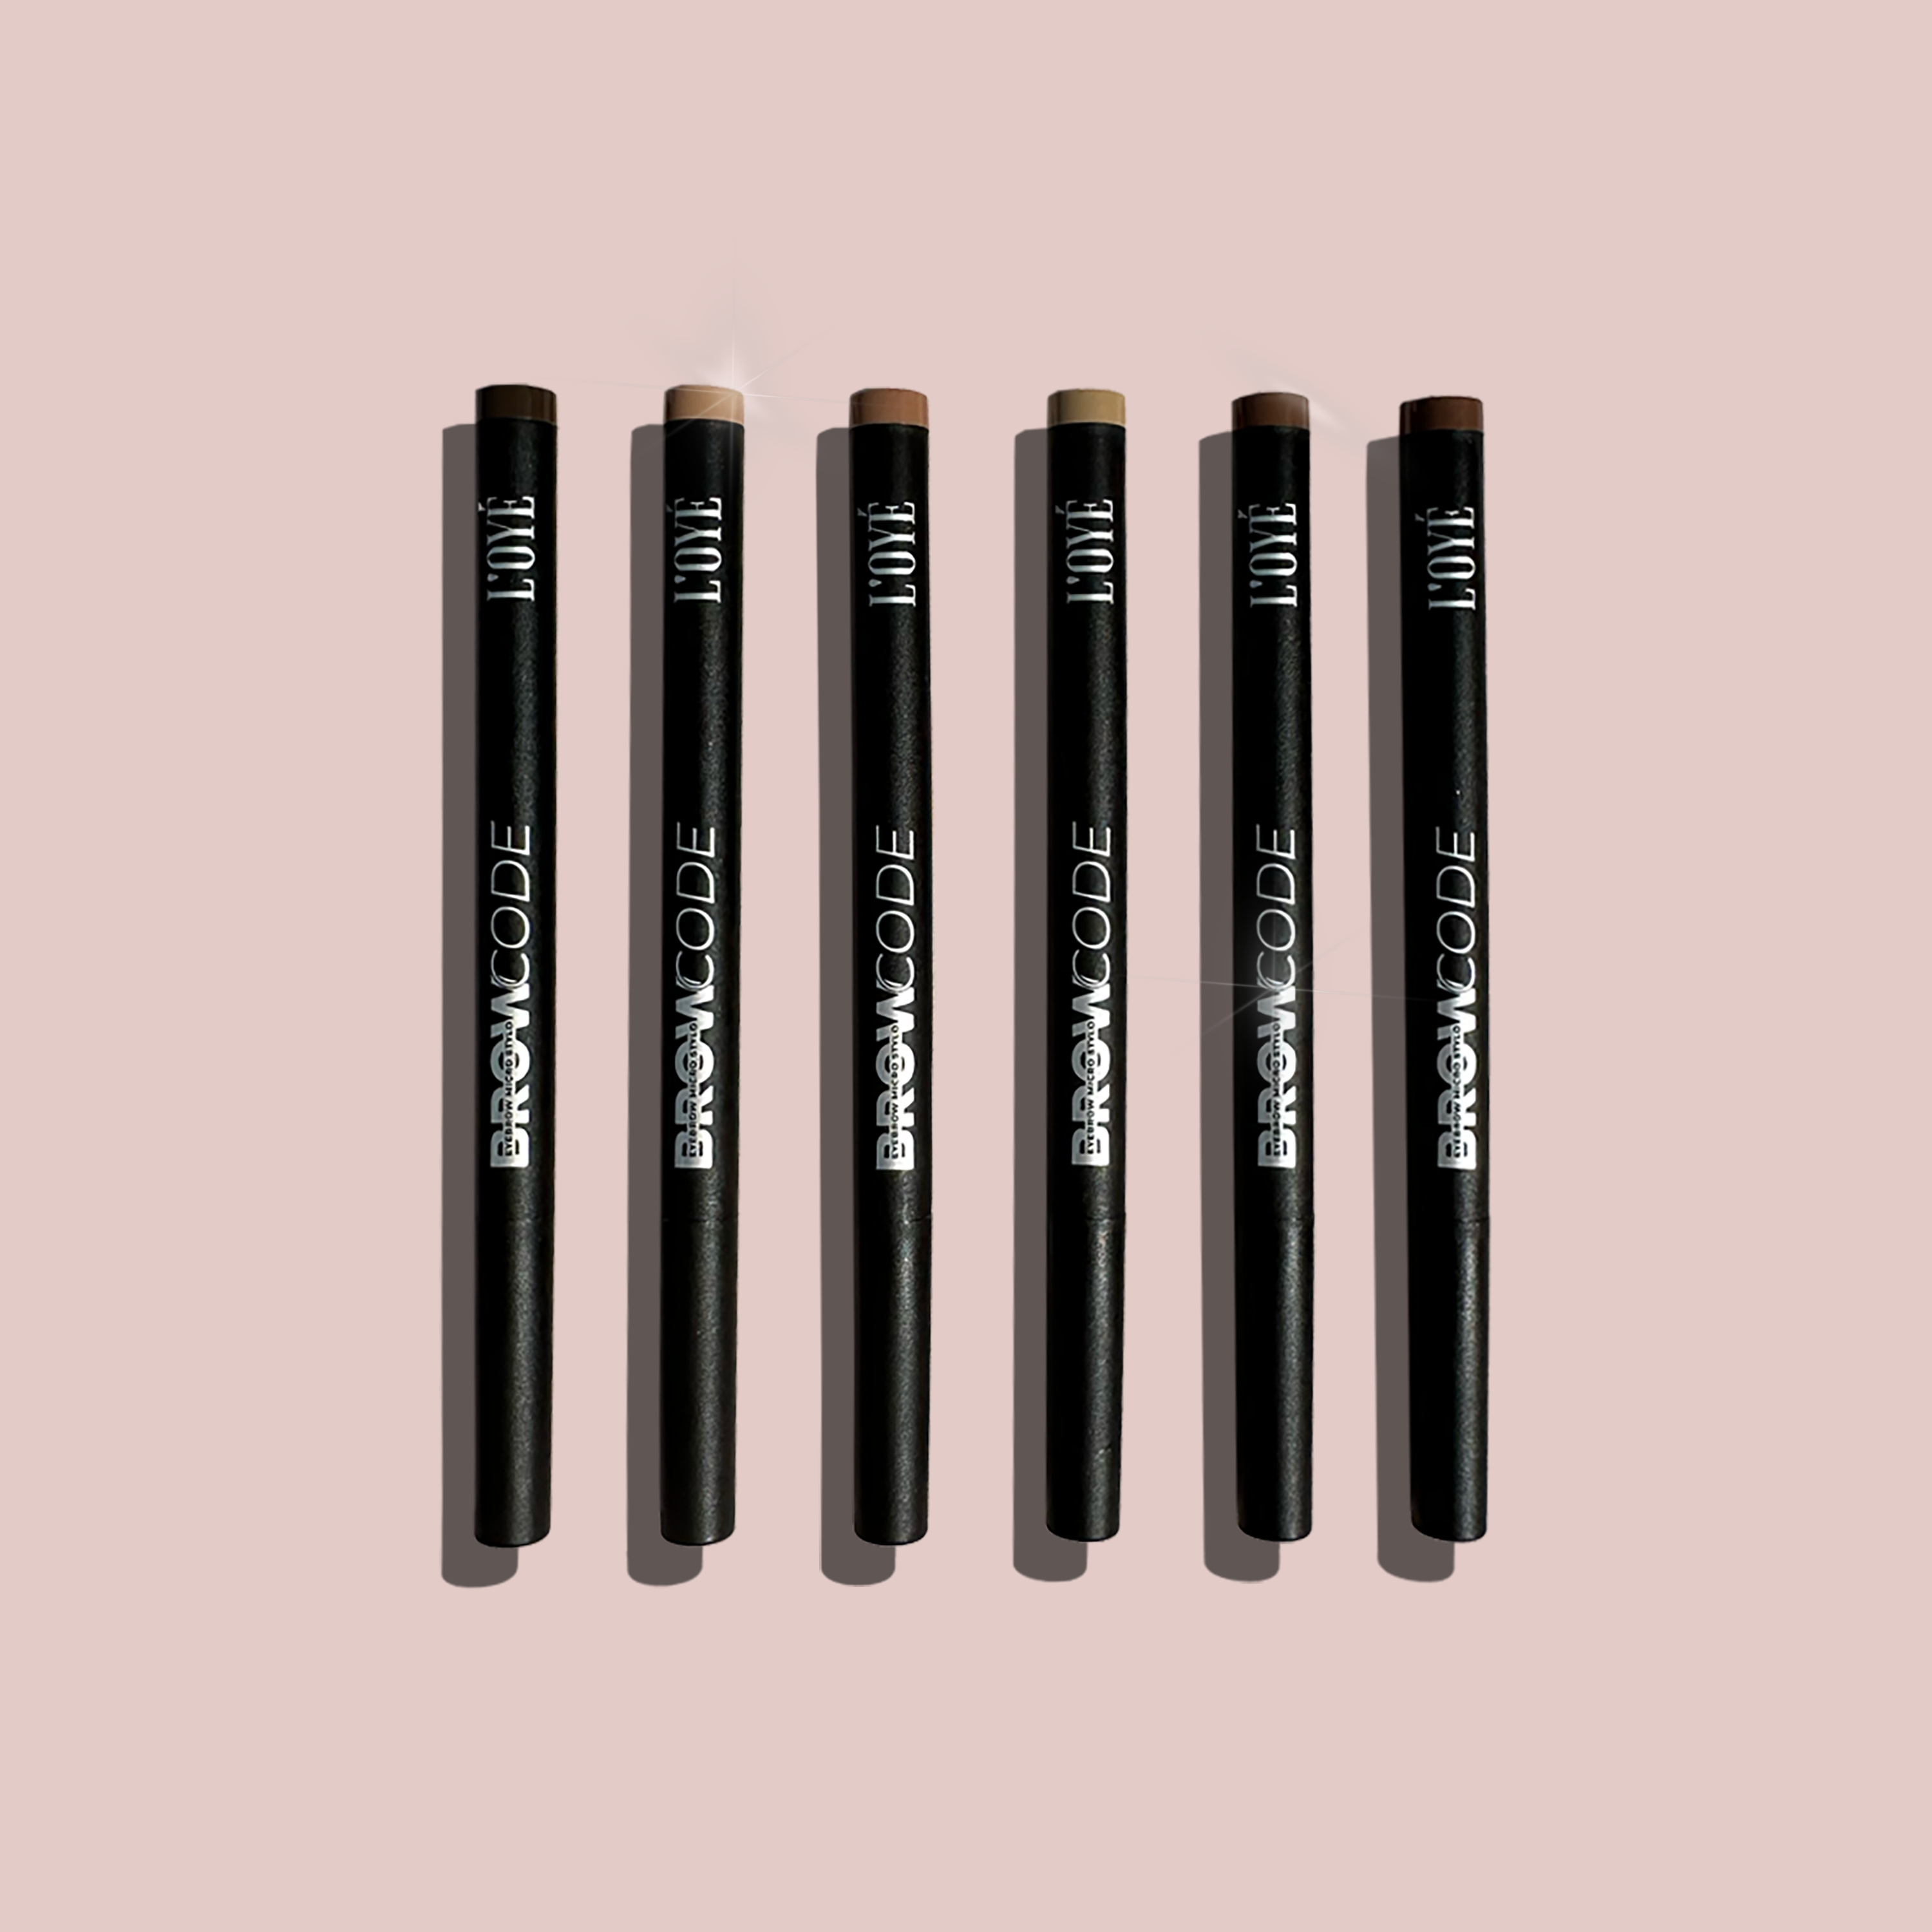 Ontdek de Browcode: Because perfect brows always come first